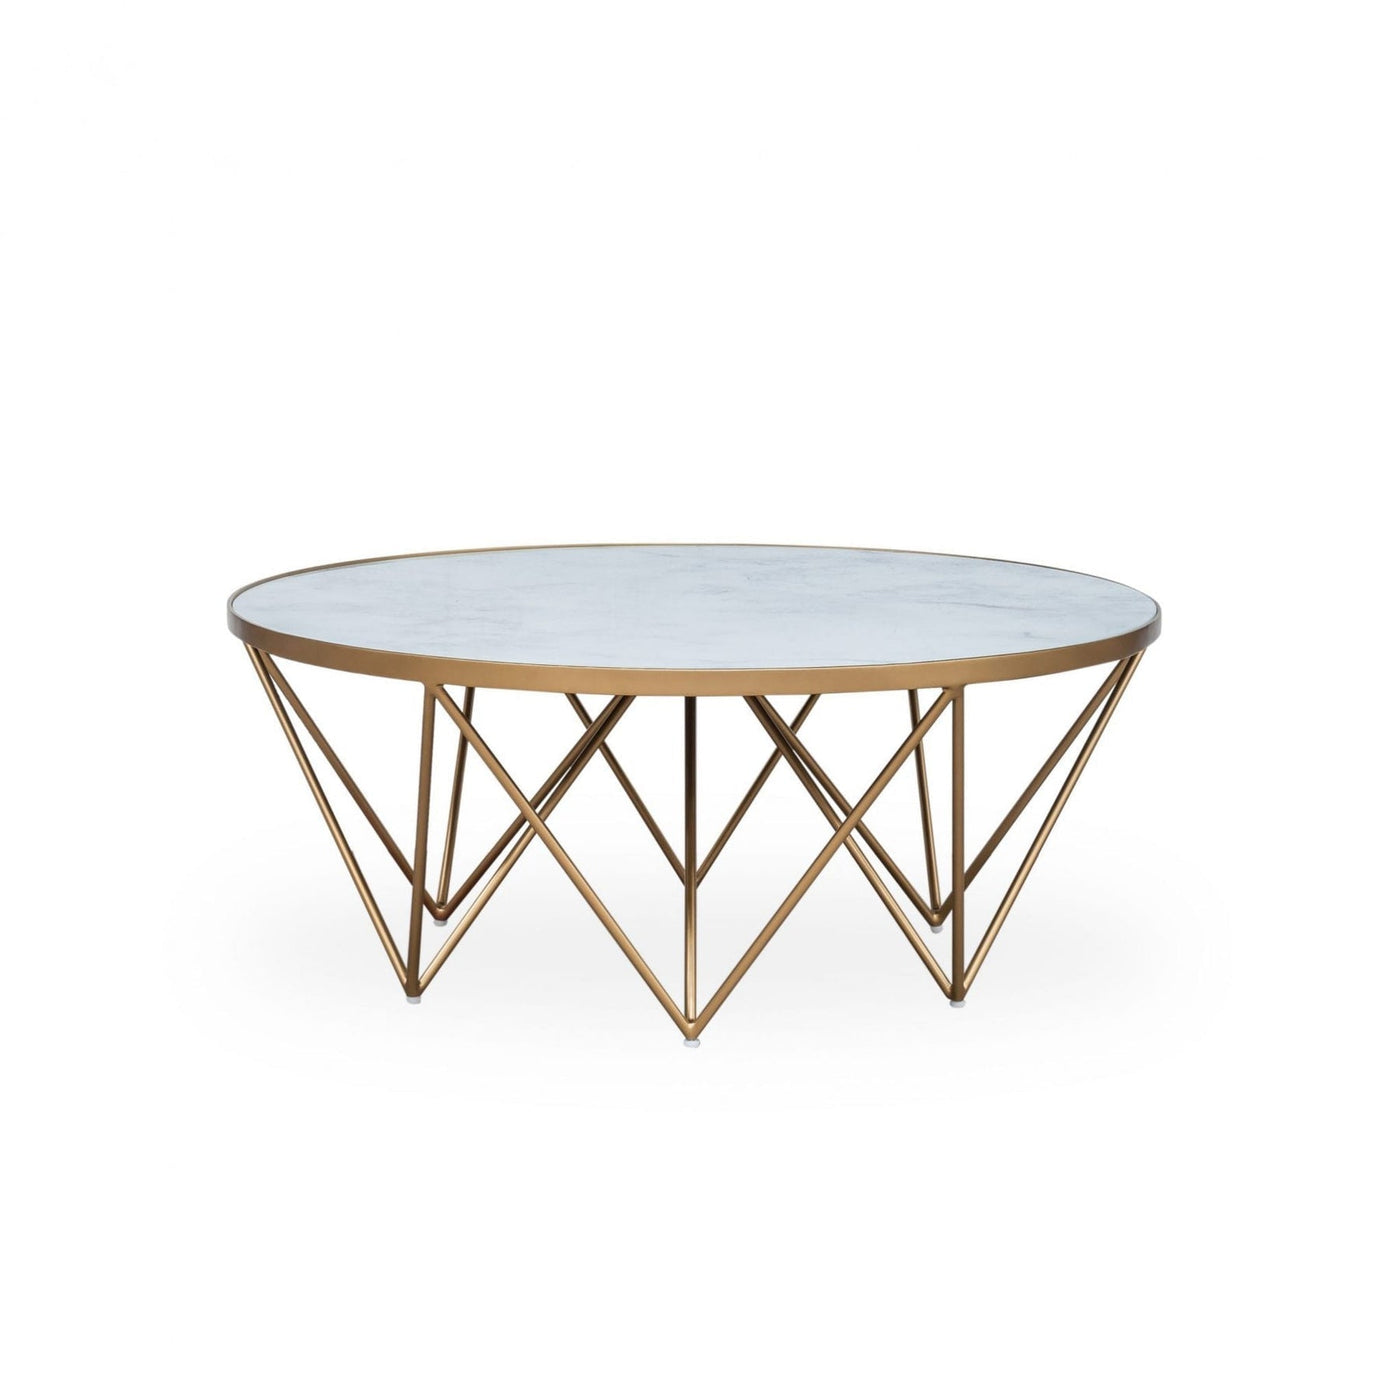 Crofton Round Coffee Table - White Marble Glass by DI Designs-Esme Furnishings